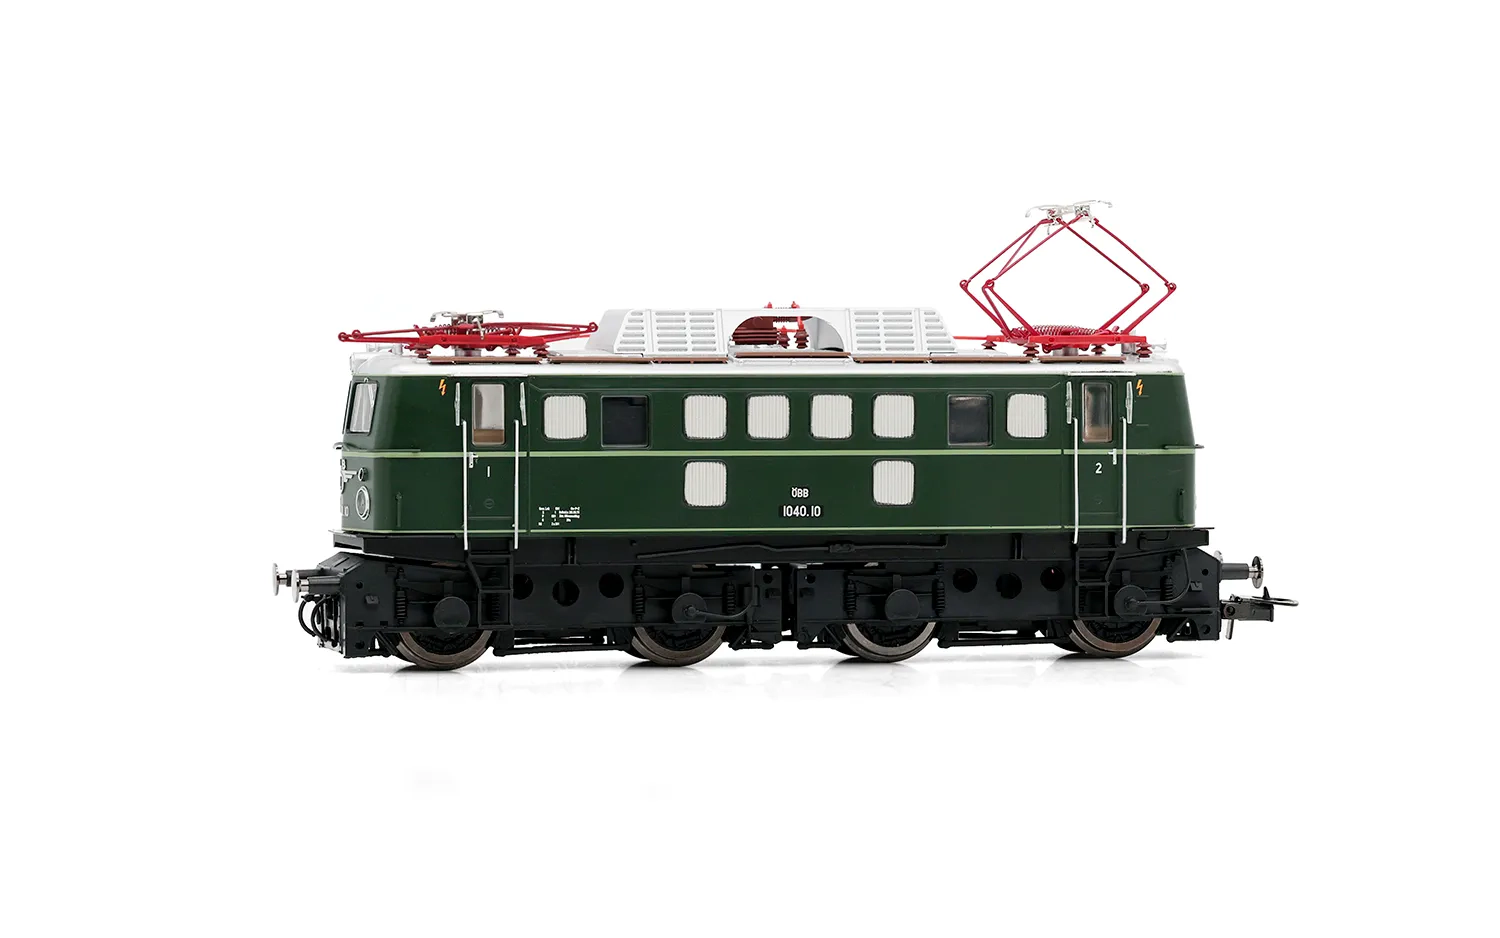 ÖBB, electric locomotive 1040.10, new lateral air vents, green livery, with brake resistors on the roof, ep. IV, with DCC sound decoder